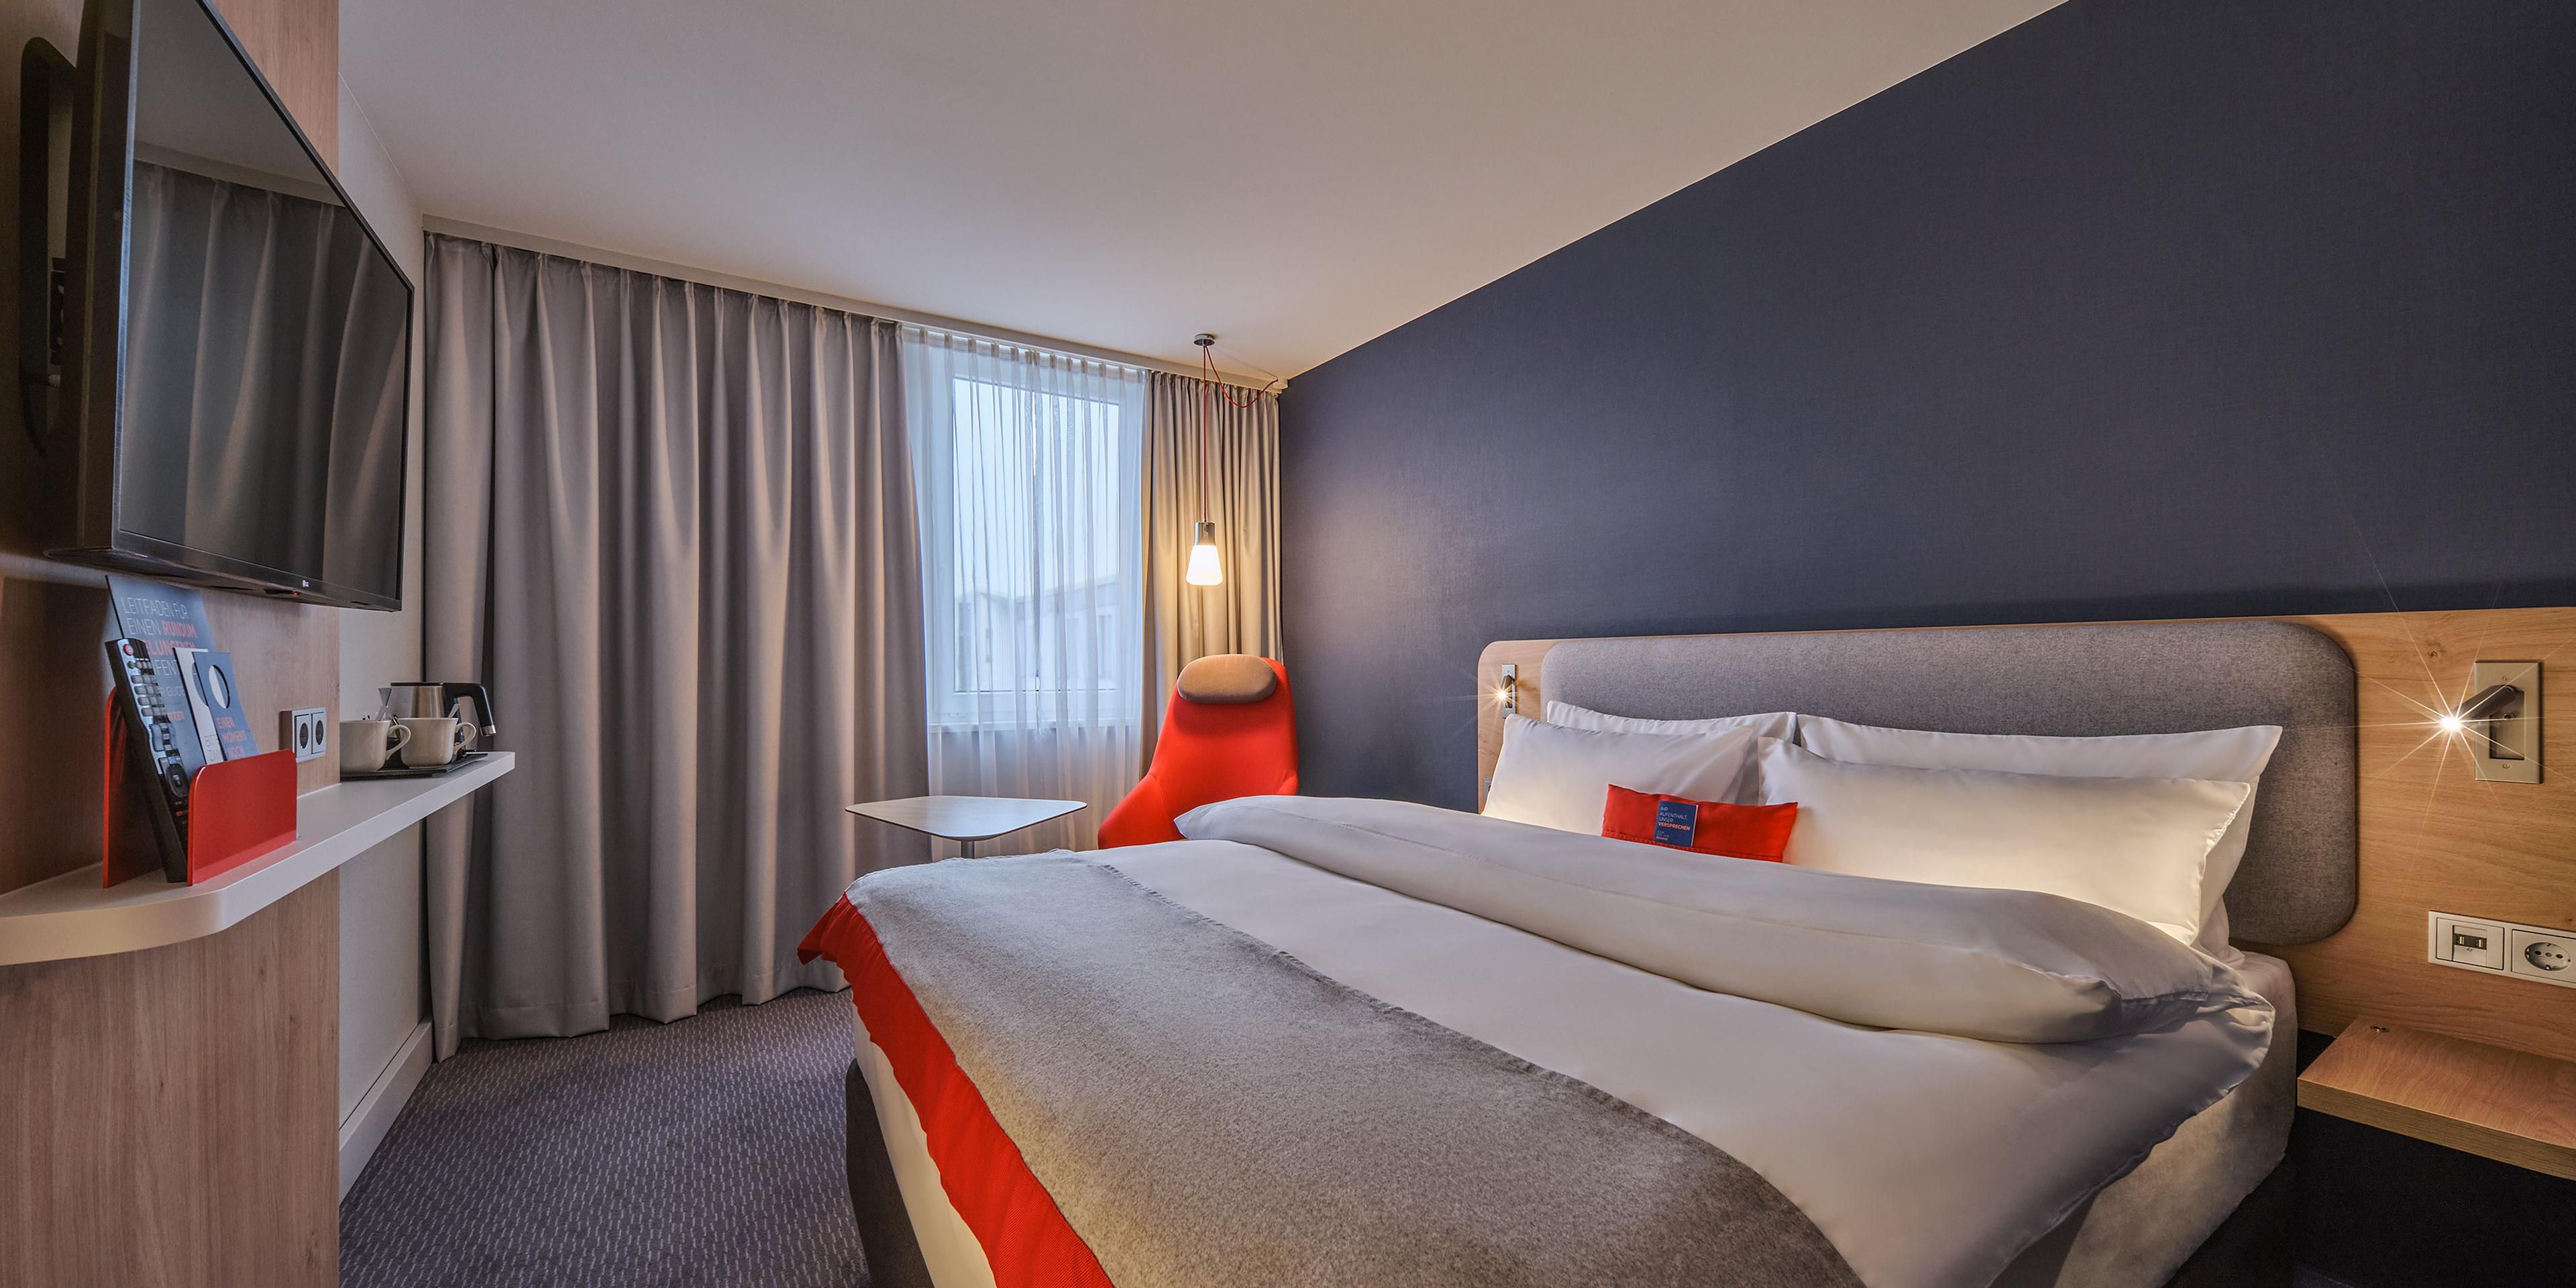 Drift off to sleep in our restful Next Generation guest rooms with blackout curtains and comfortable beds. They´re decorated in calm shades enlivened by pops of colour and all have Smart TVs, bedside USB ports and inclusive Wi-Fi. If you´re travelling with kids, all our family rooms have sofa beds.